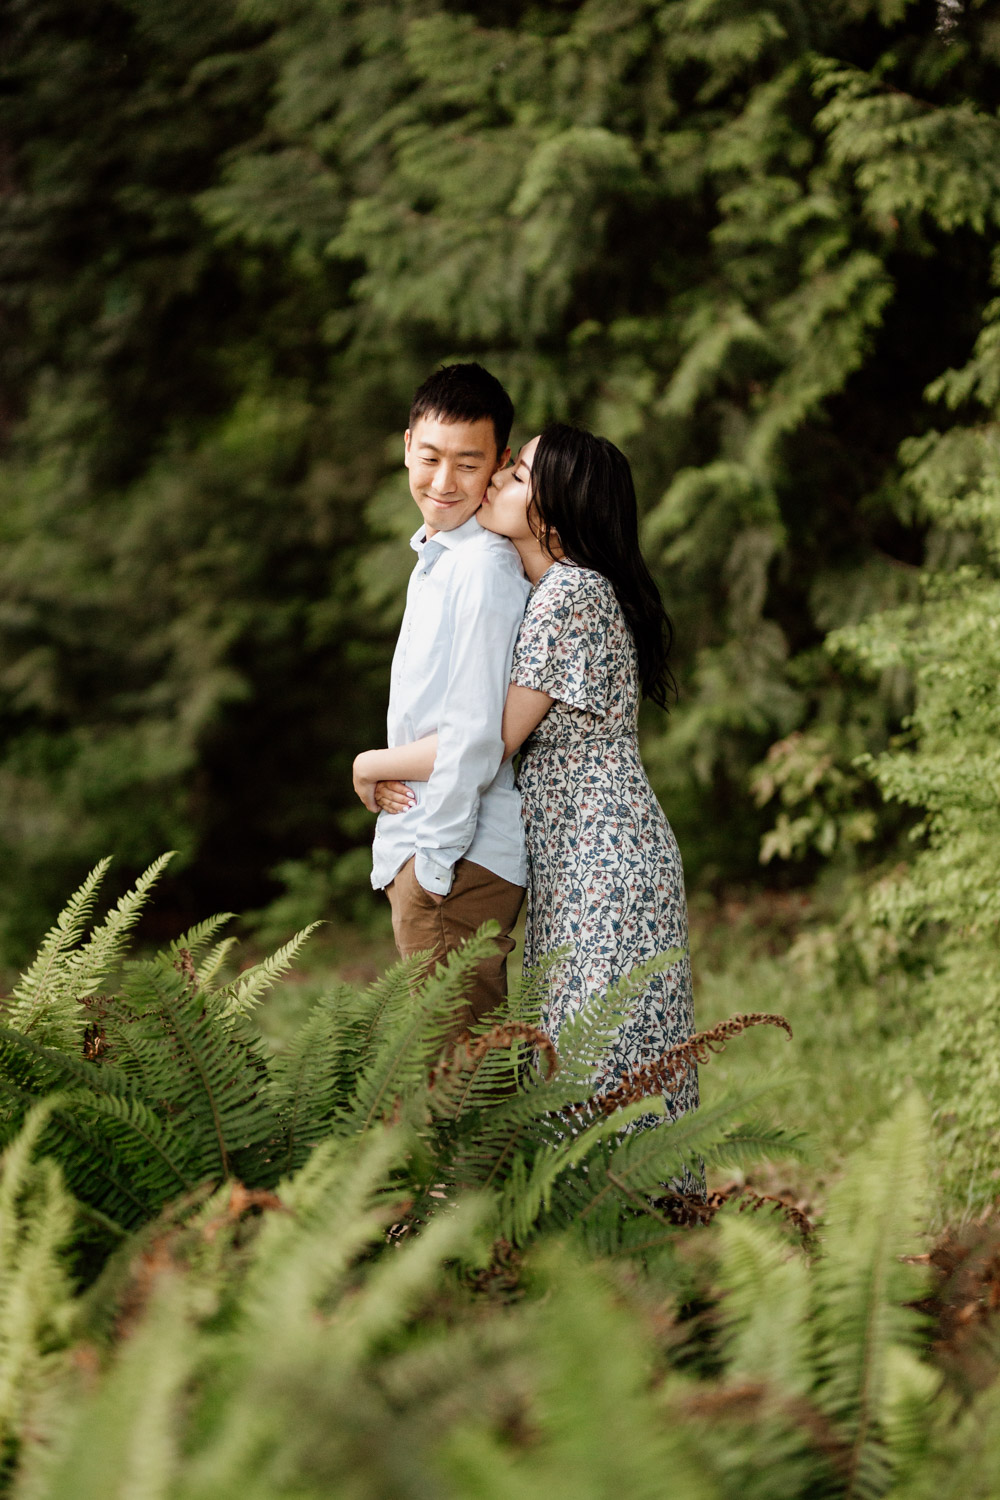 stanley park engagement photography in vancouver bc during sunset or golden hour at rose garden